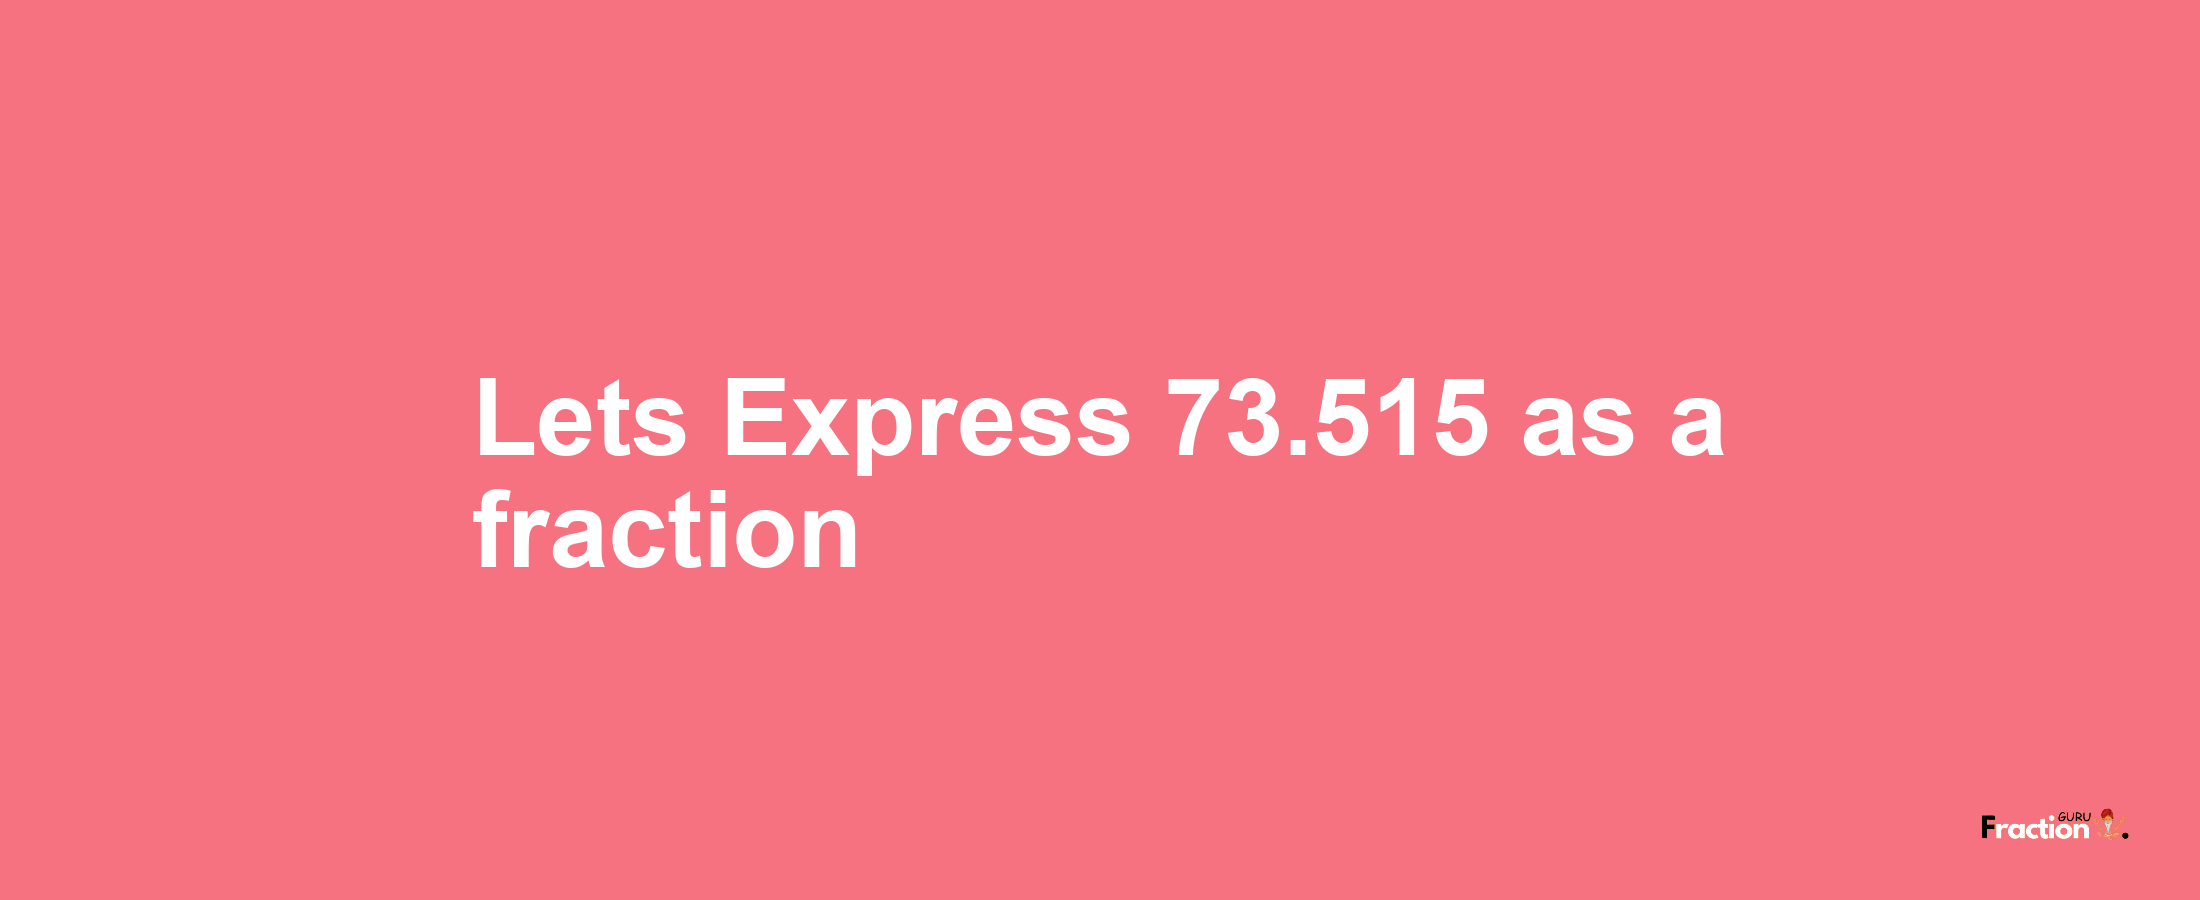 Lets Express 73.515 as afraction